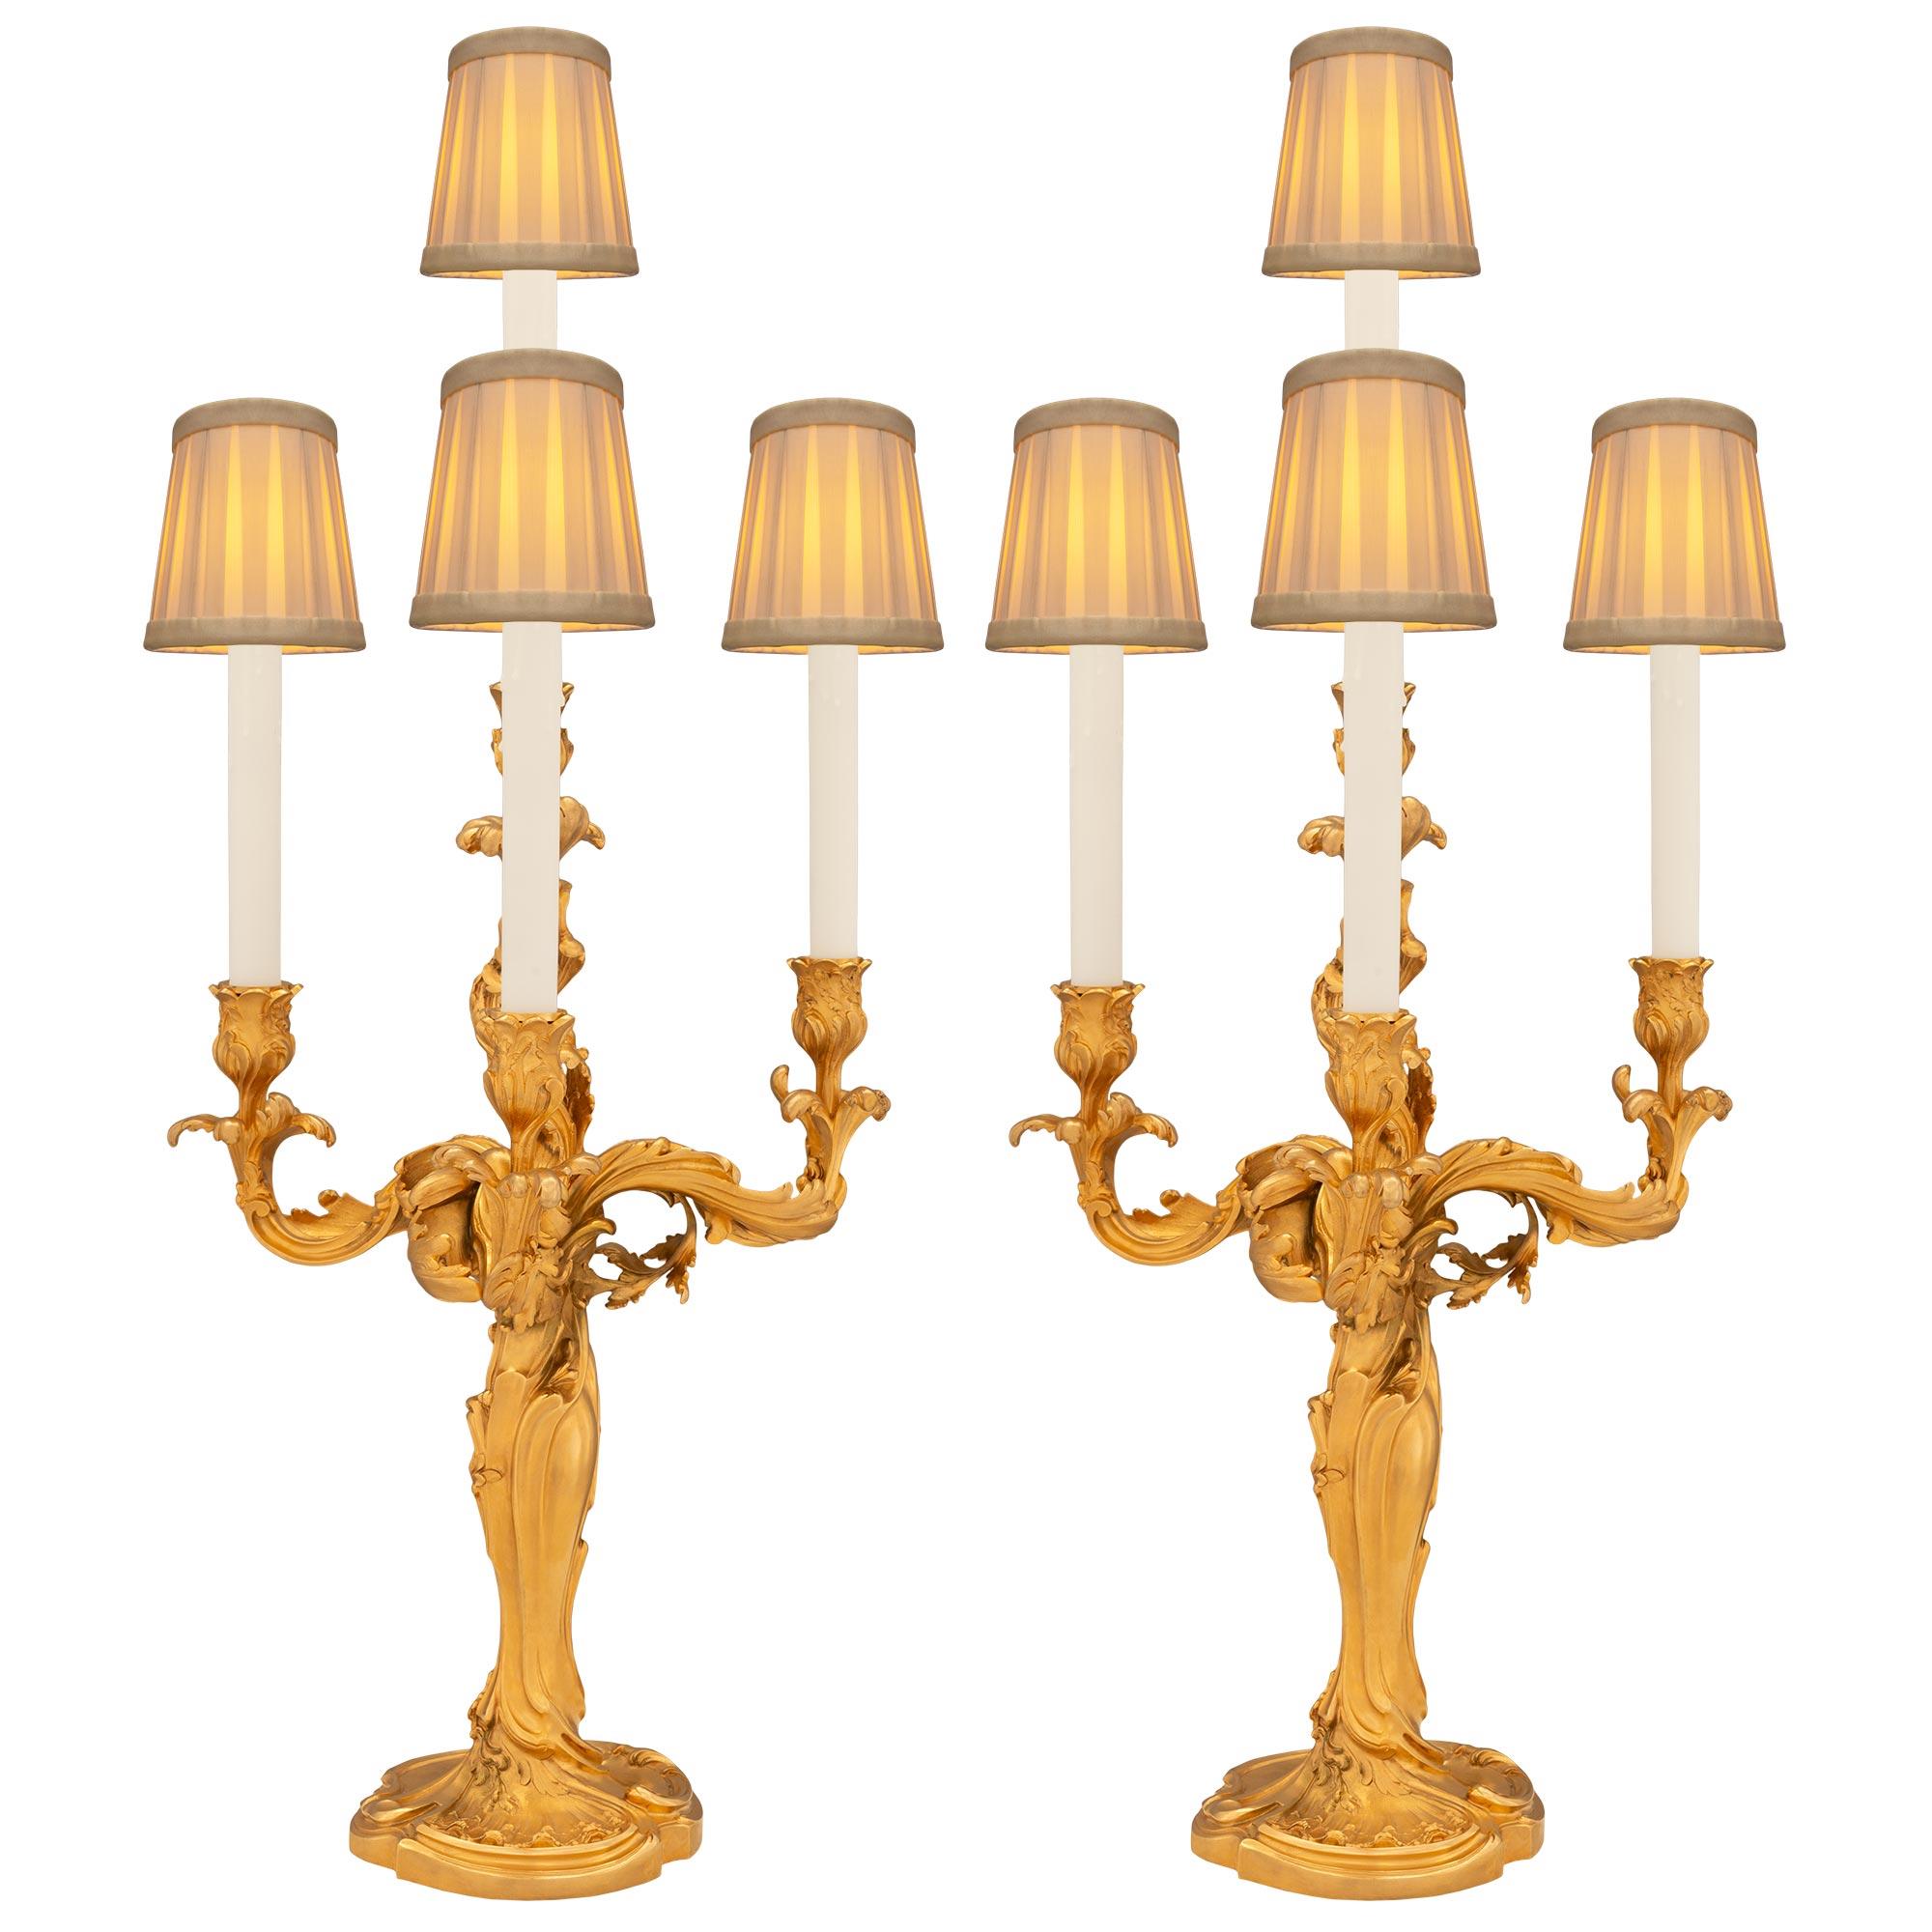 A handsome and large scaled pair of French late 19th century Louis XV st. Ormolu candelabras signed E. Lelivevre and casted by Susse Freres Foundary. The pair of four arm electrified candelabras are raised on circular bases with scrolled movements